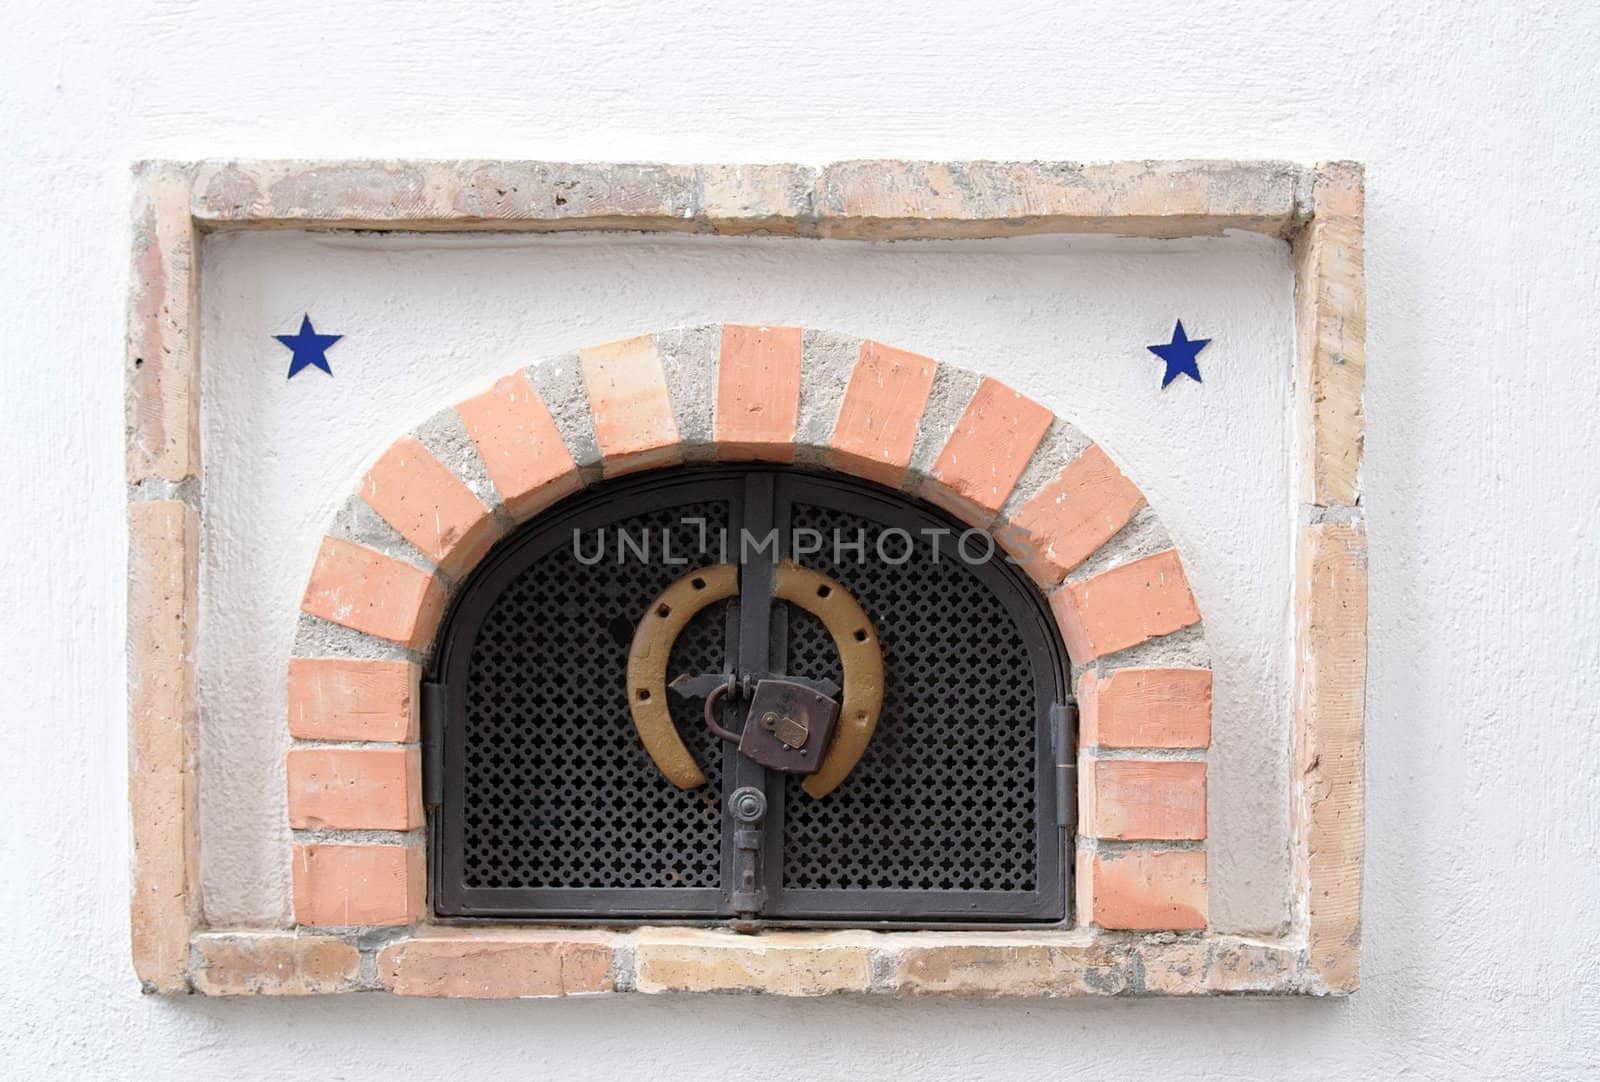 Small ventilation window with grate, padlock and horseshoe